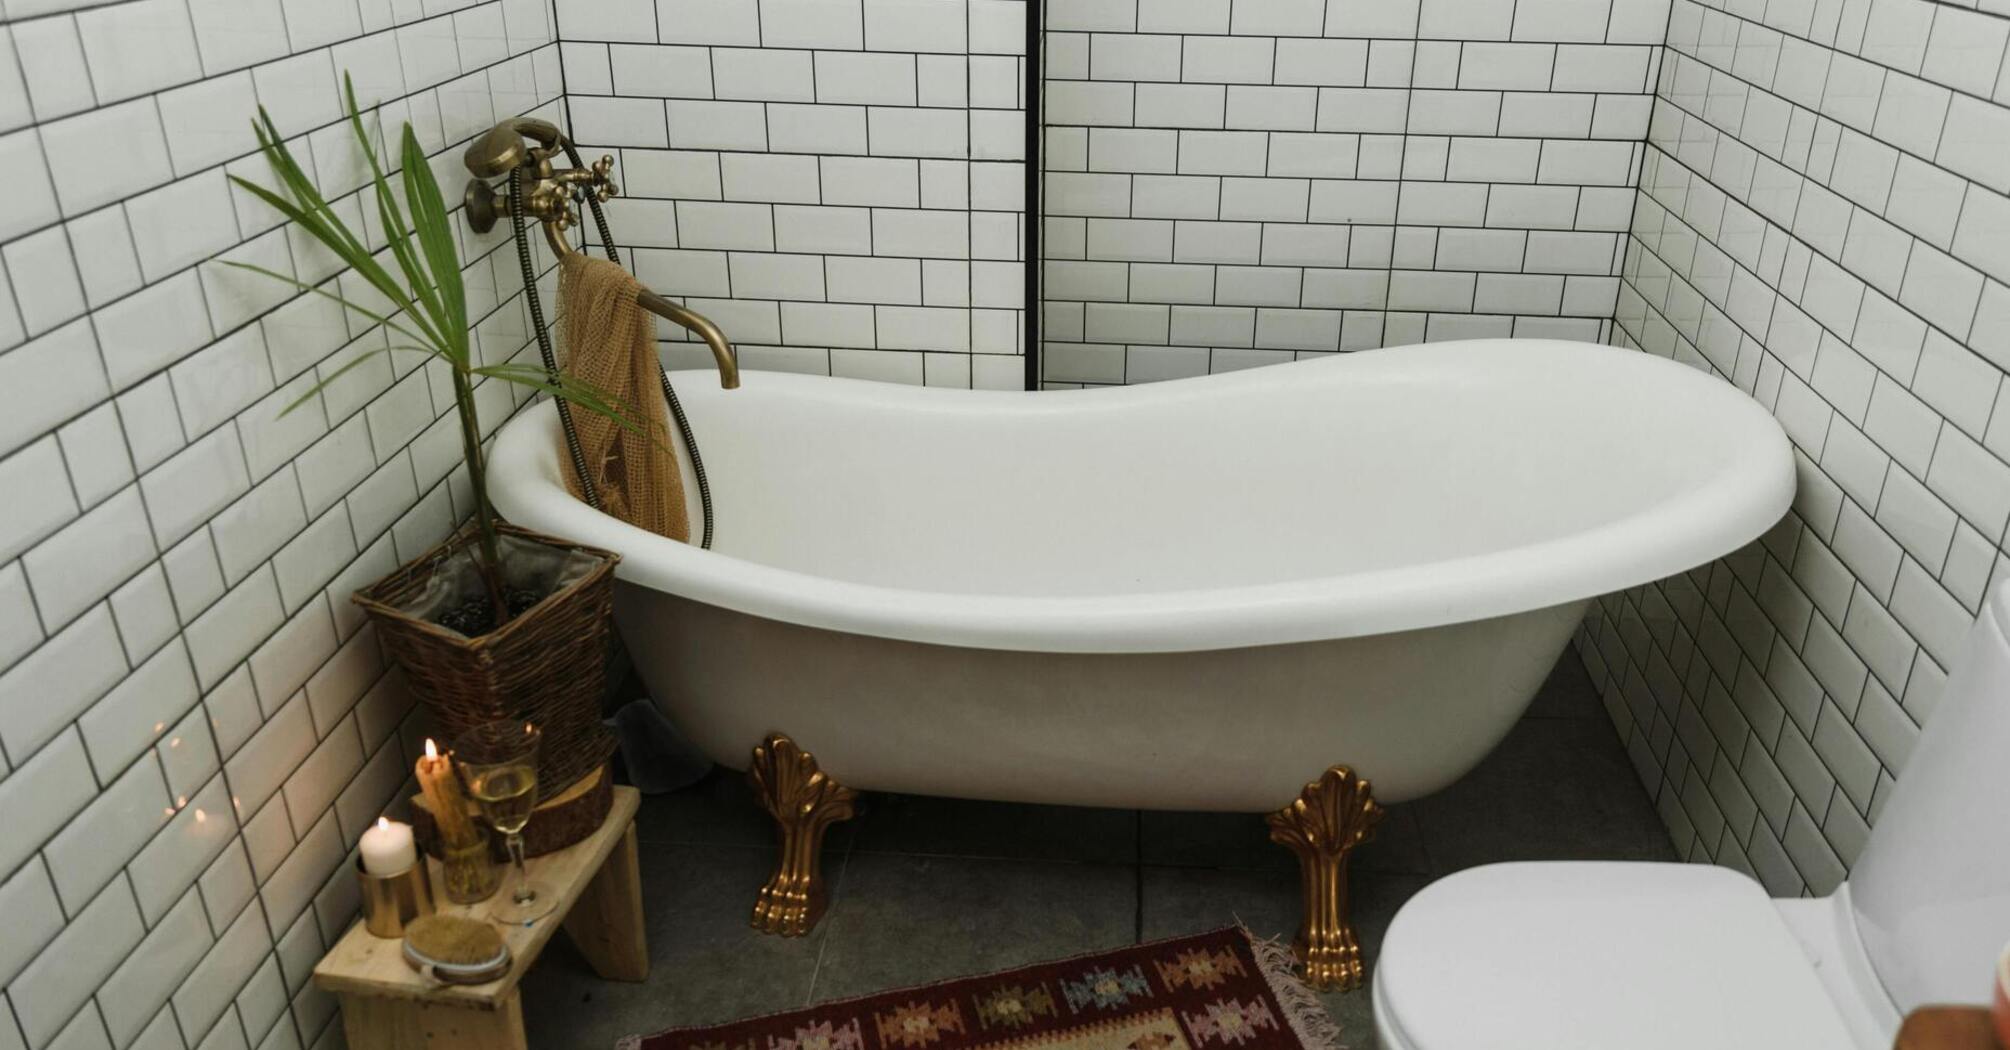 Give a second life to an old cast iron bathtub: 5 interesting ideas